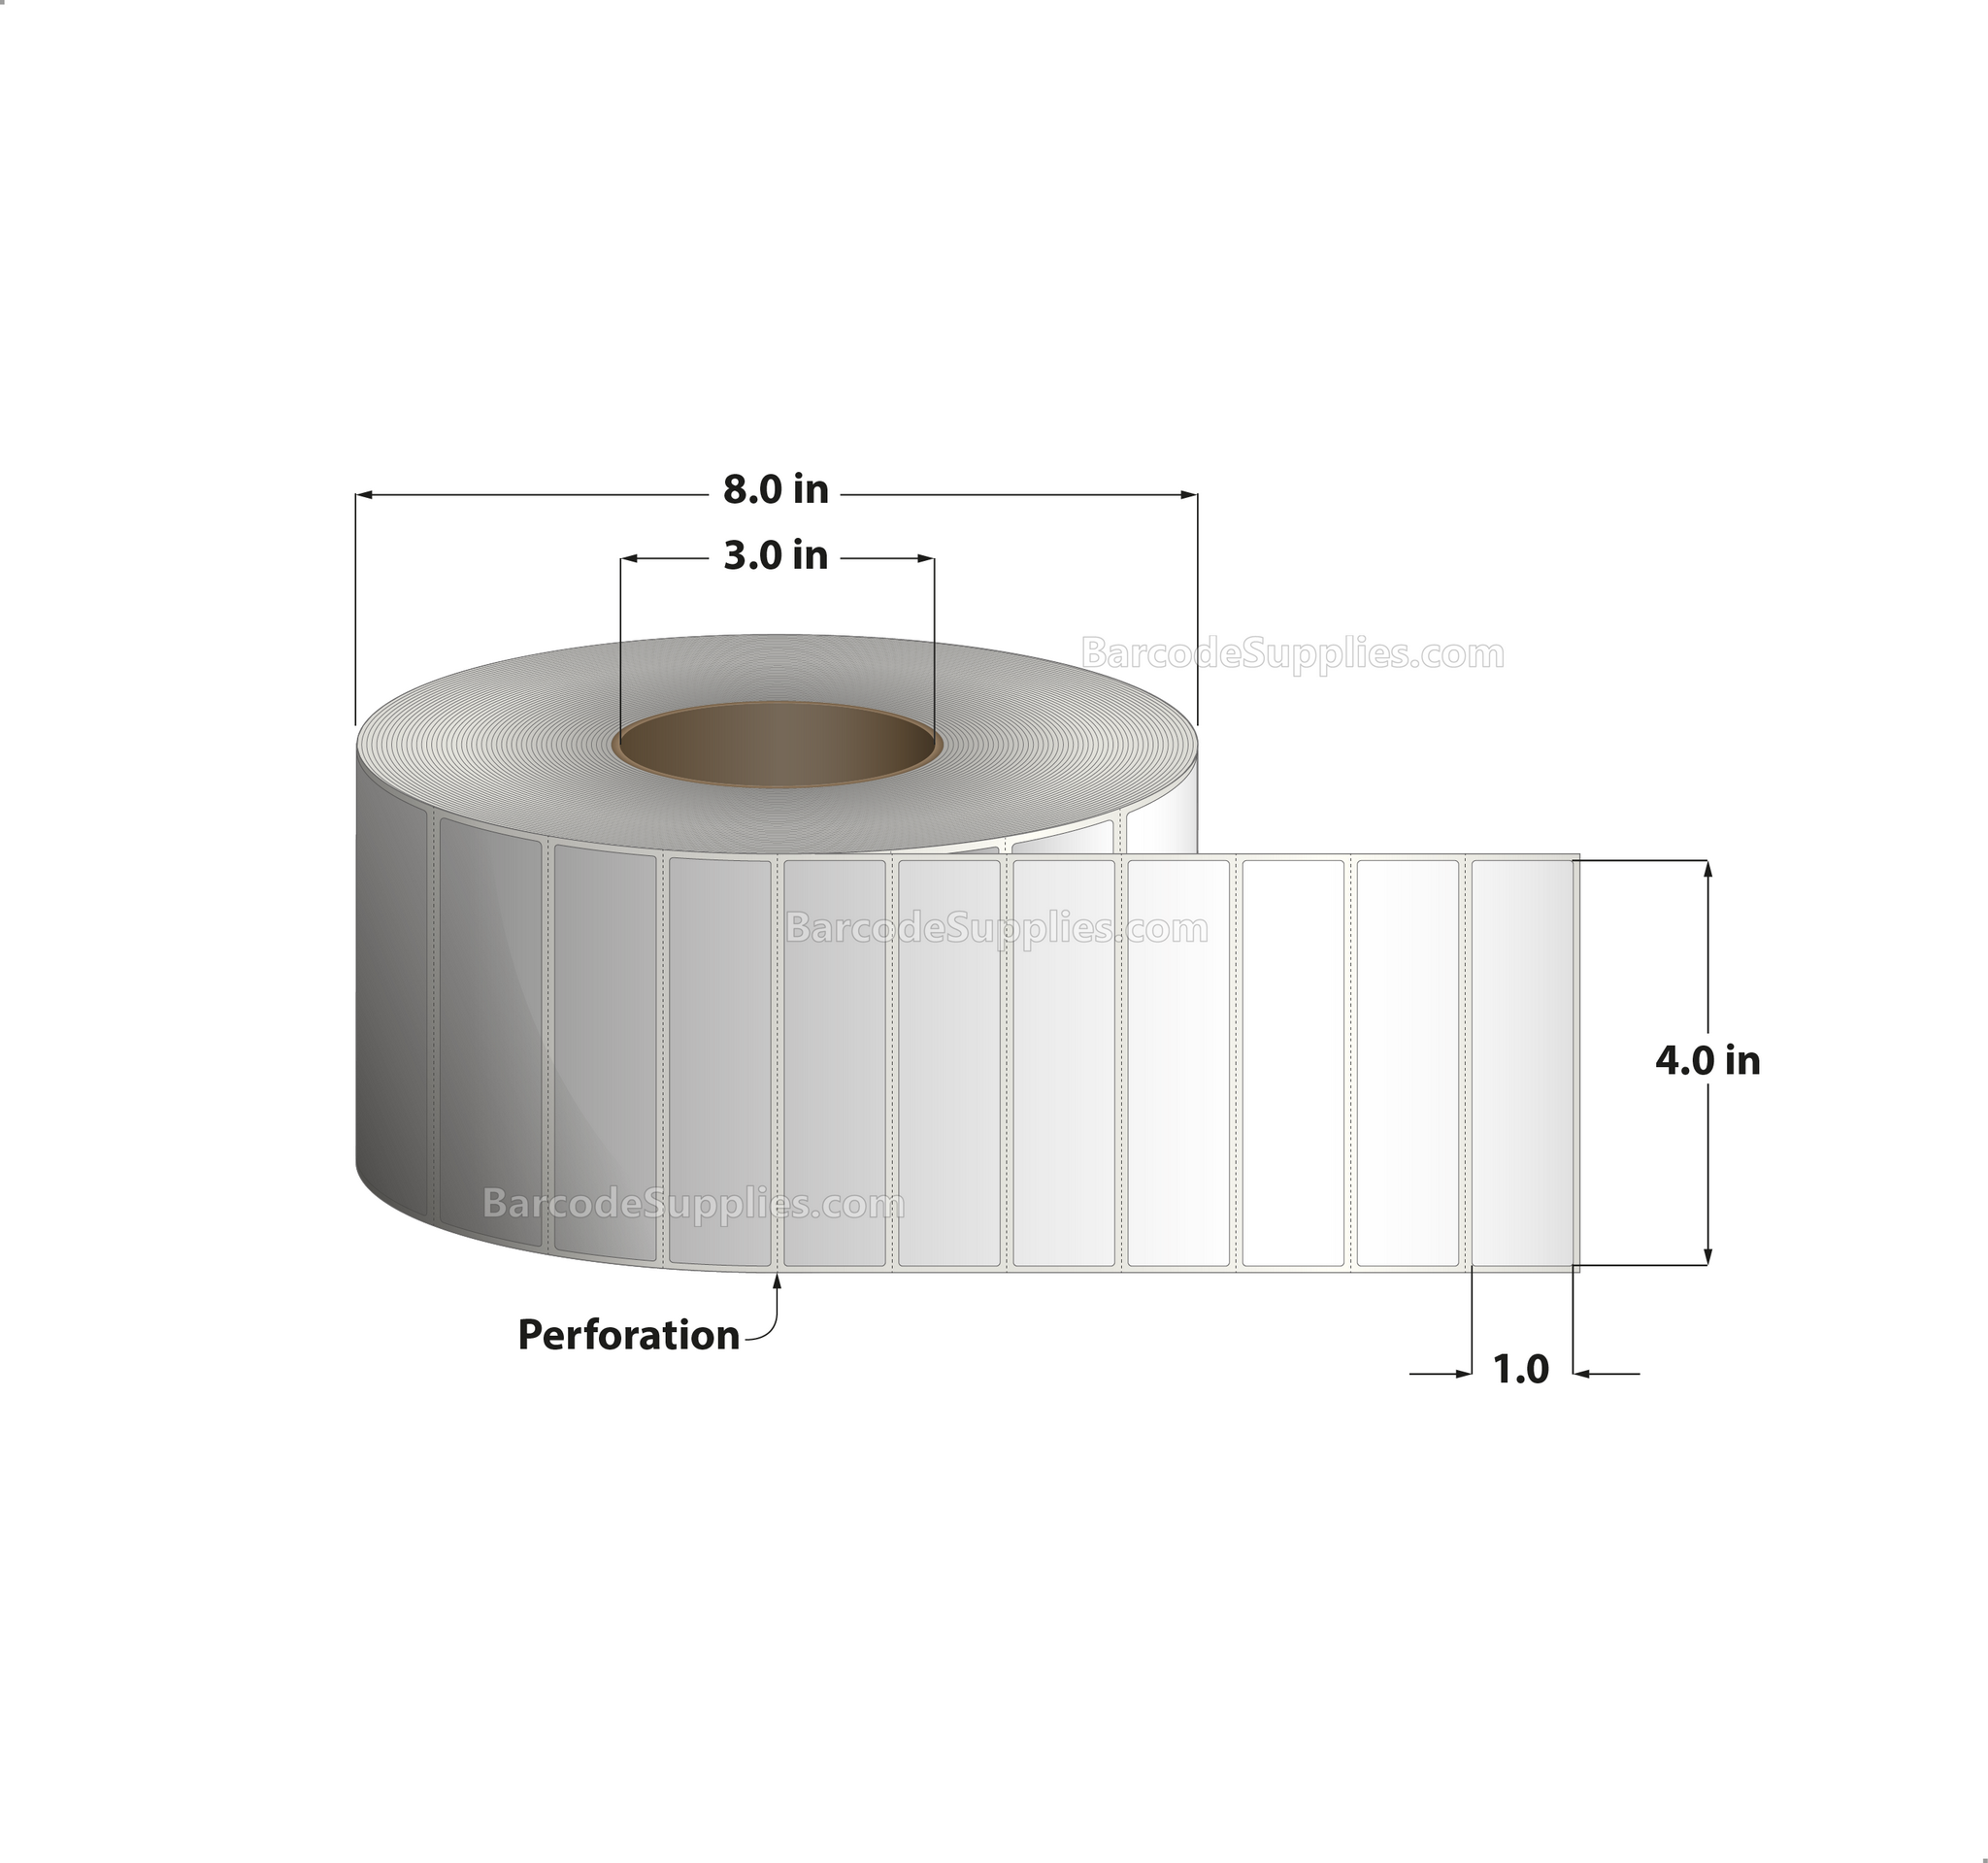 4 x 1 Direct Thermal White Labels With Acrylic Adhesive - Perforated - 5500 Labels Per Roll - Carton Of 4 Rolls - 22000 Labels Total - MPN: RDS-4-1-5500-3